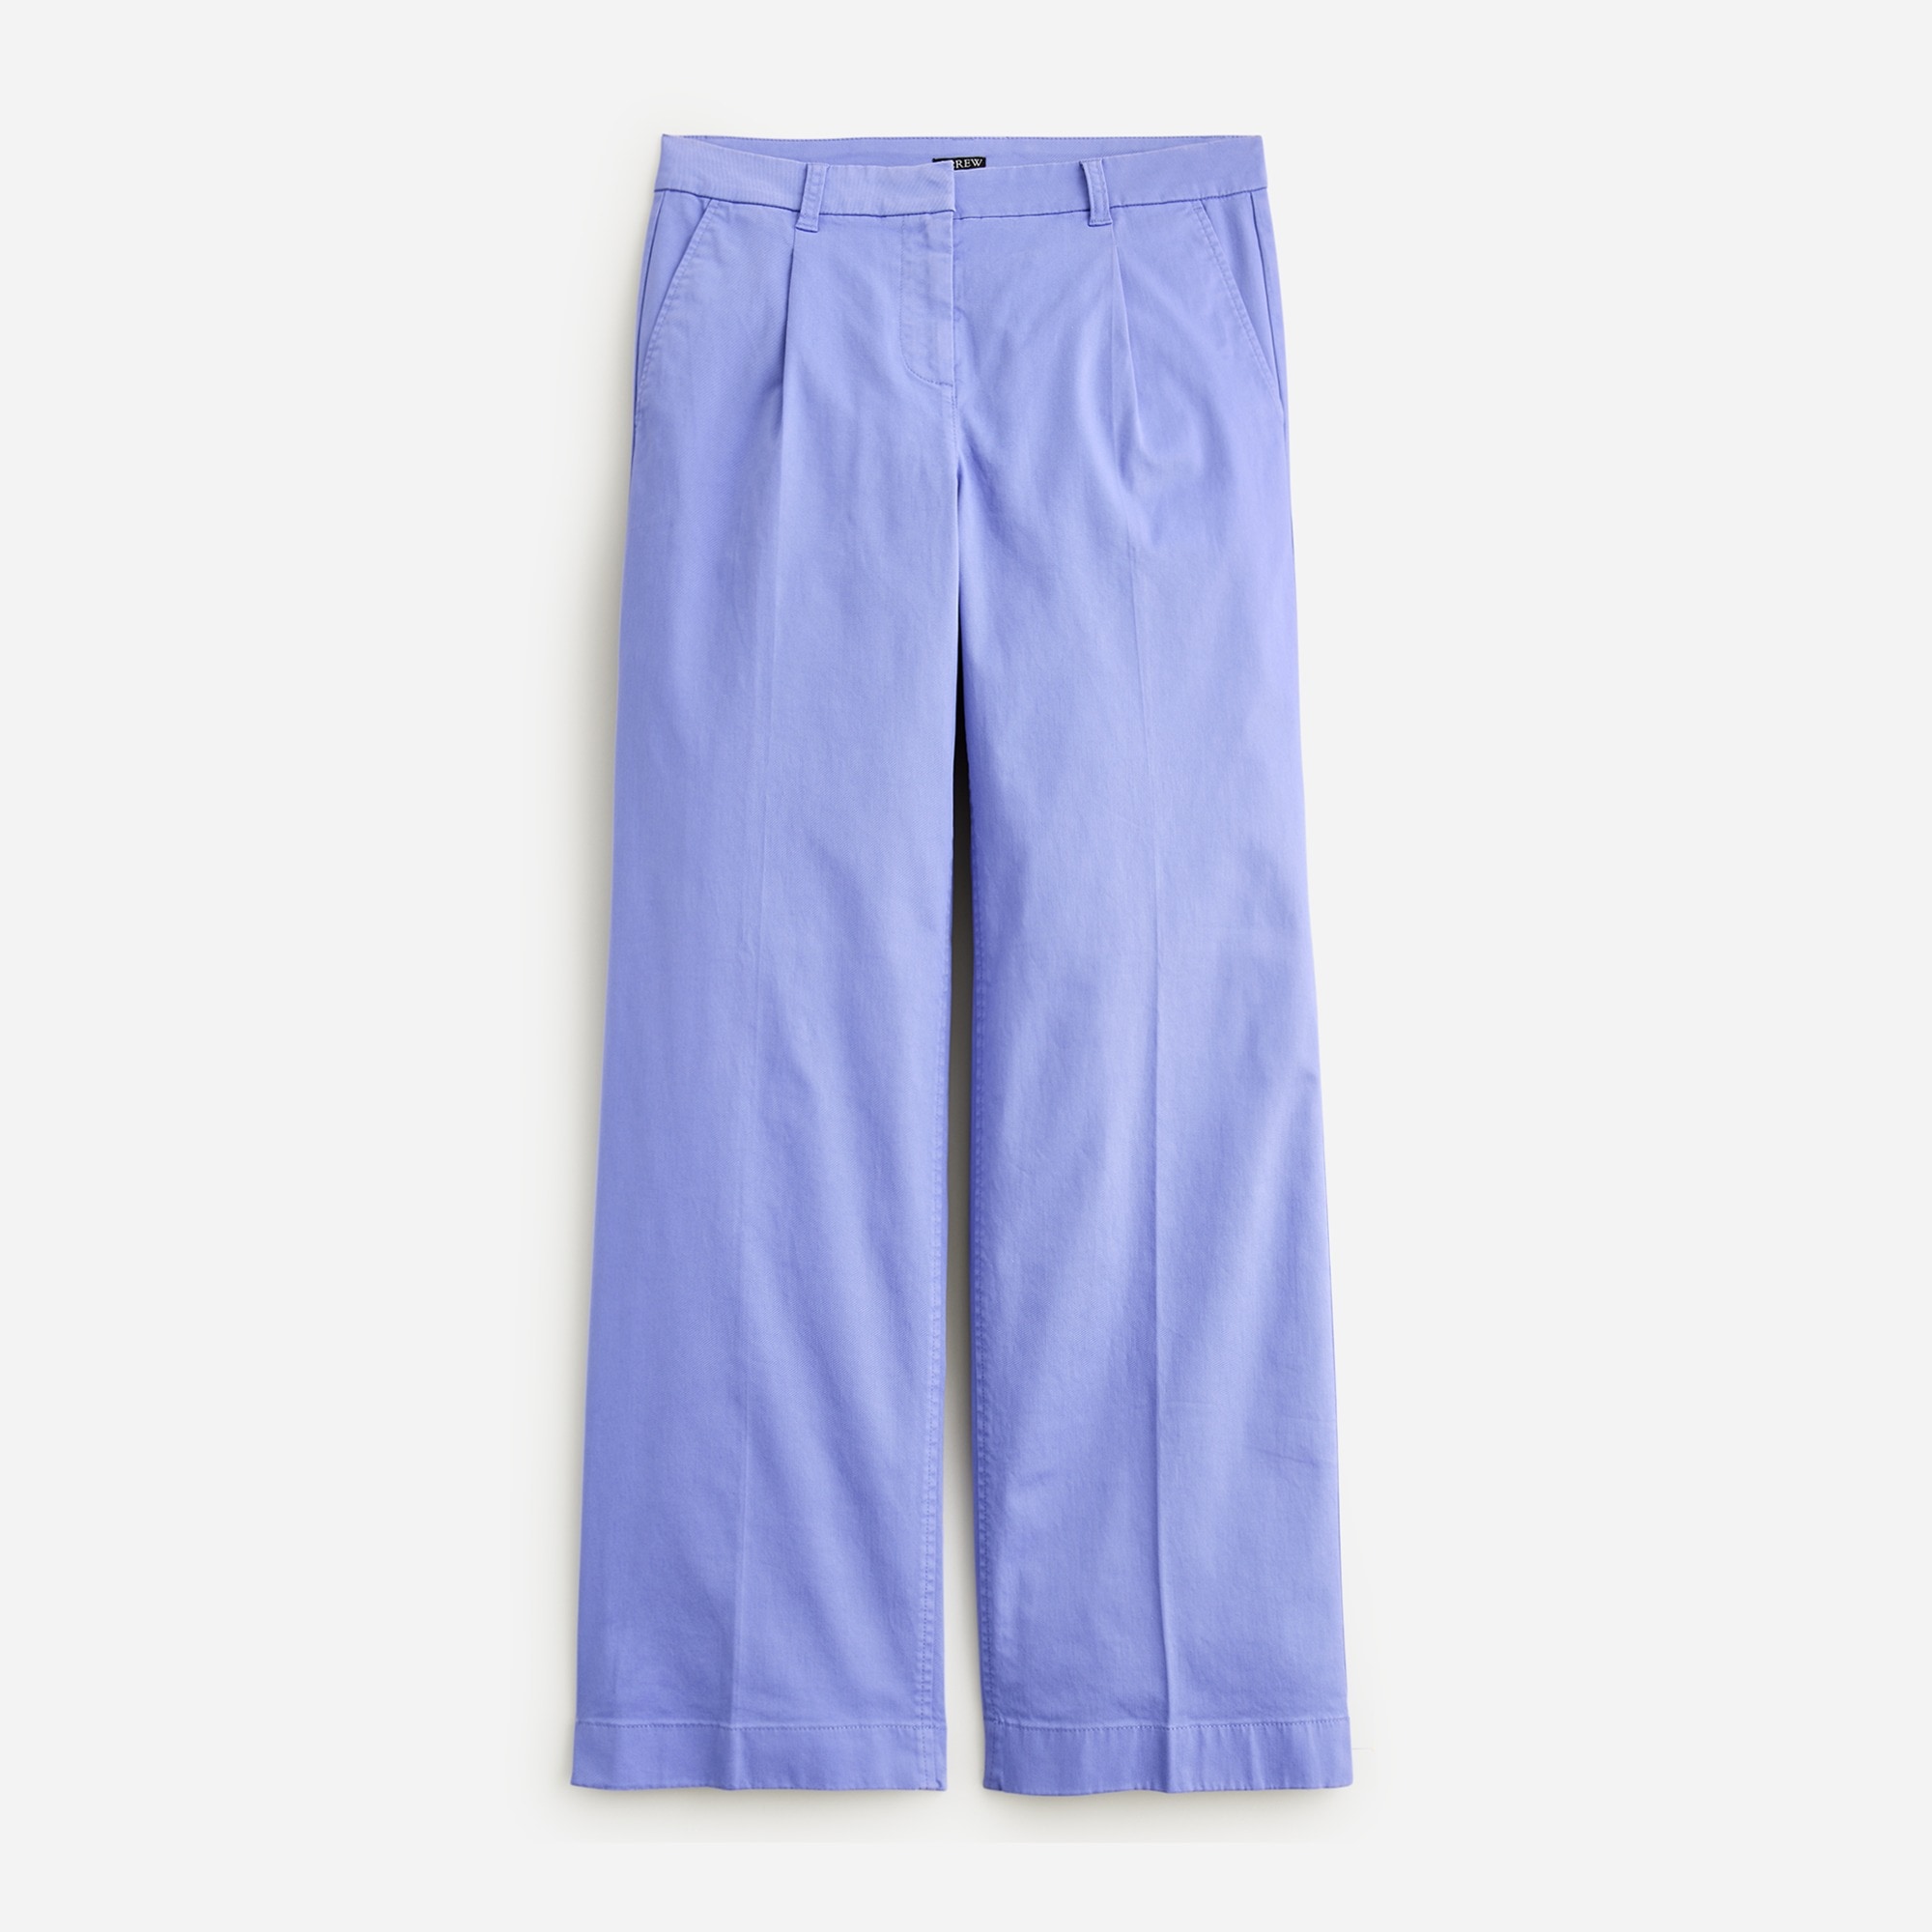 J.Crew: Pleated Capeside Chino Pant For Women